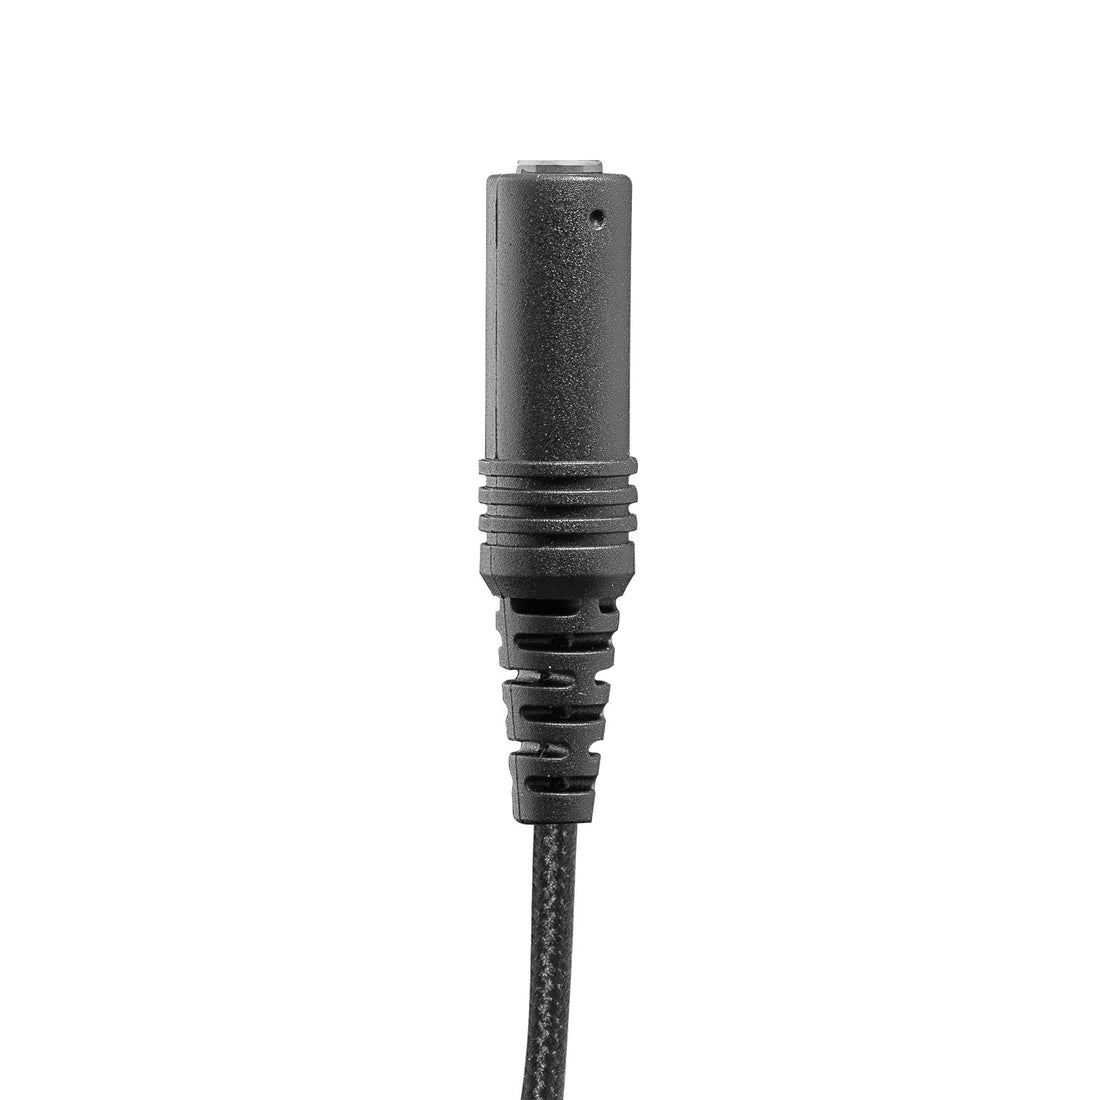 N-ear: Acoustic Tube to 3.5mm Adaptor Cable